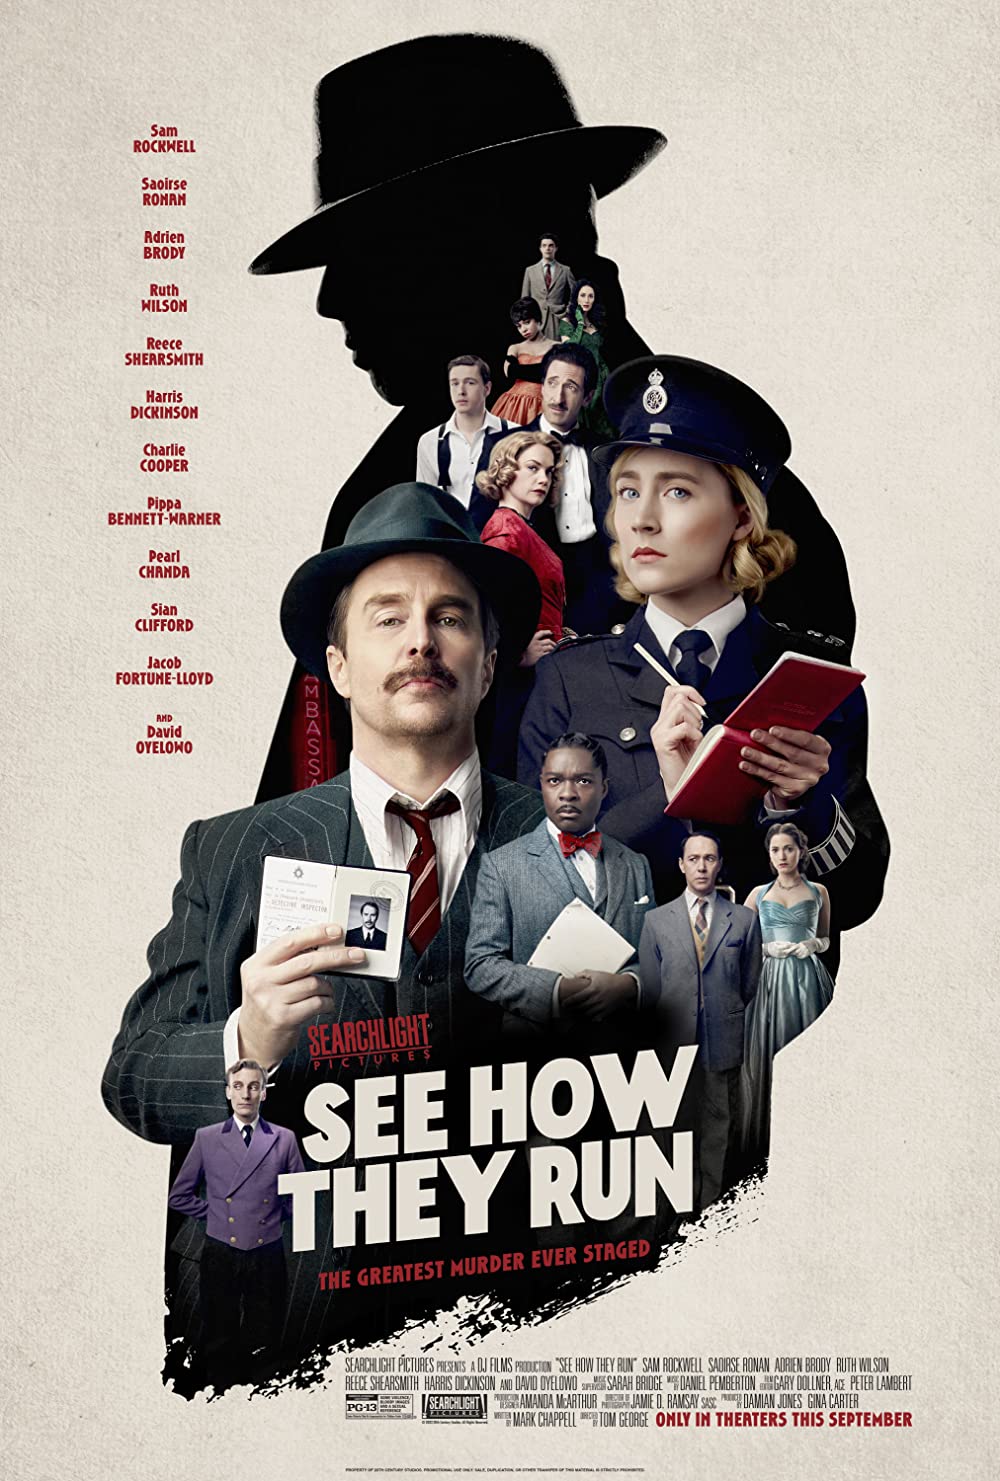 See How They Run Movie (2022) Cast & Crew, Release Date, Story, Review, Poster, Trailer, Budget, Collection
